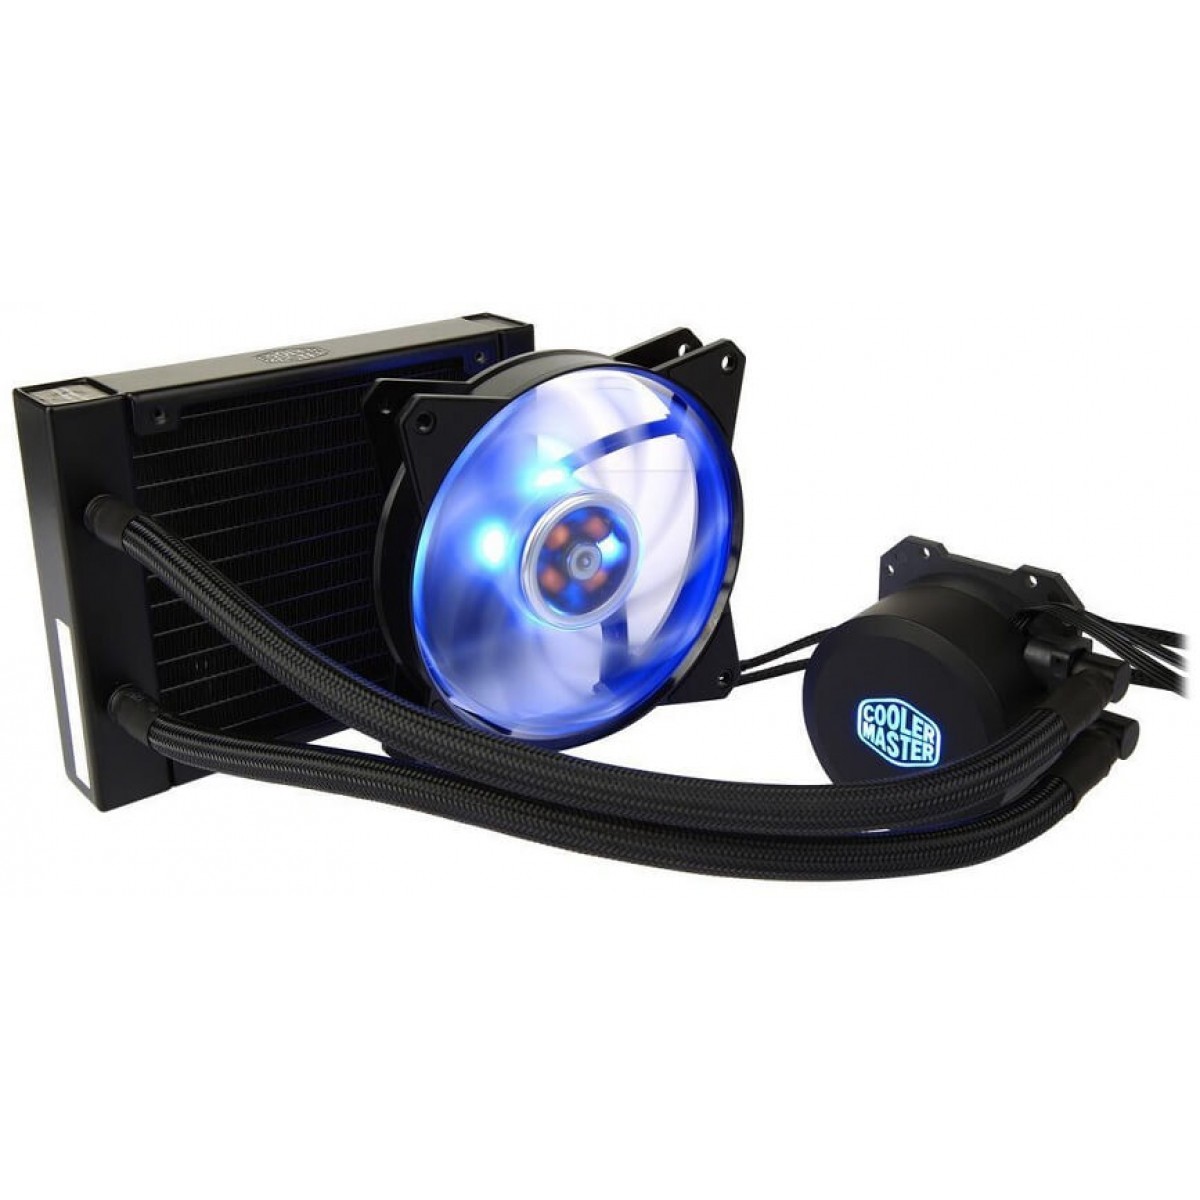 Water Cooler Cooler Master Masterliquid ML120L, RGB 120mm, Intel-AMD, MLW-D12M-A20PC-R1